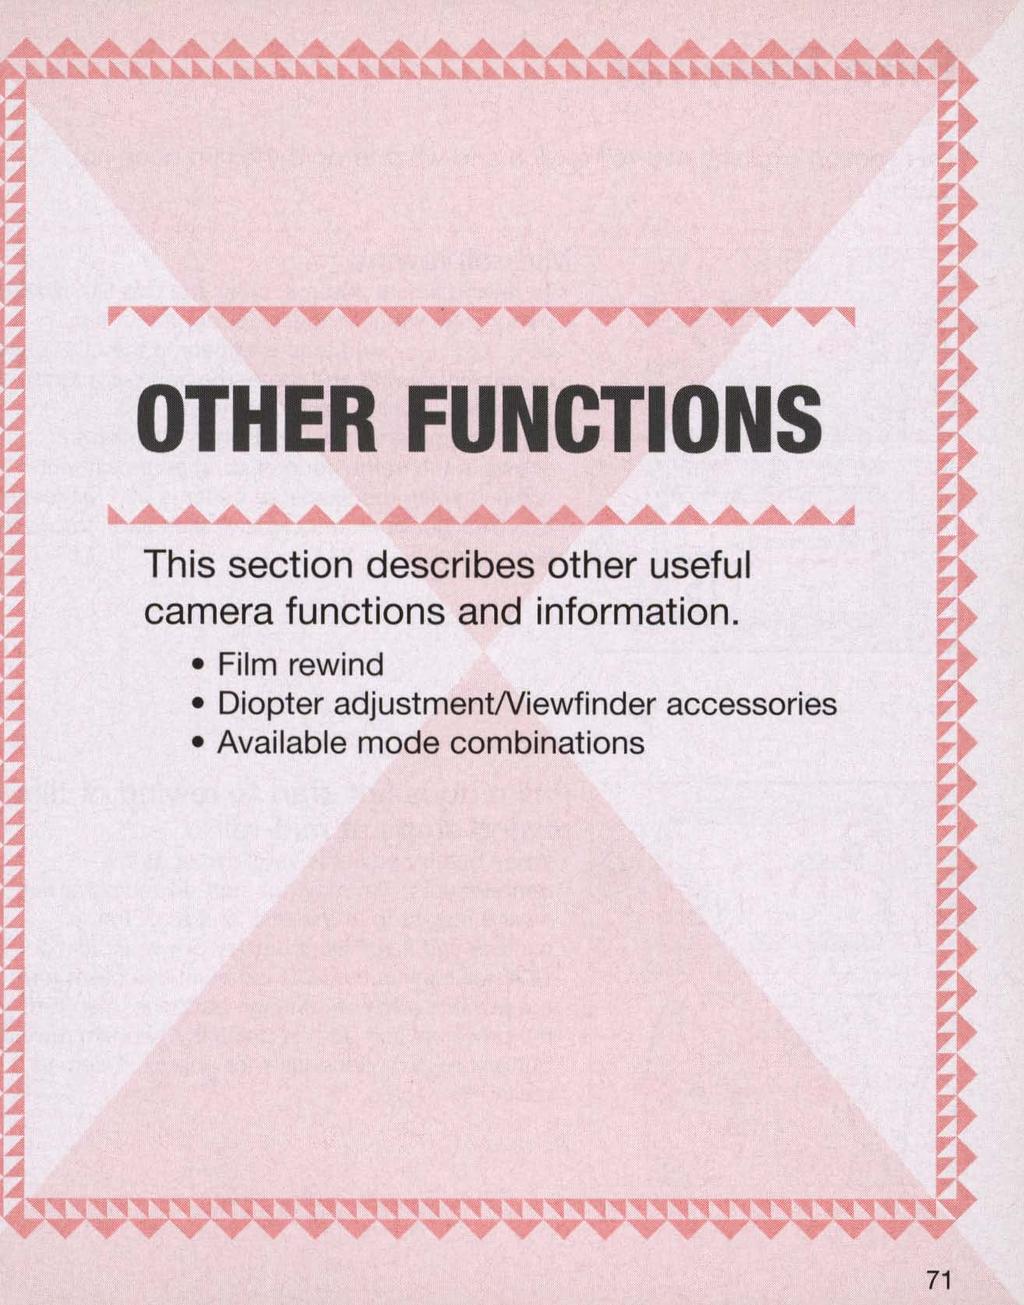 OTHER FUNCTIONS This section describes other useful camera functions and